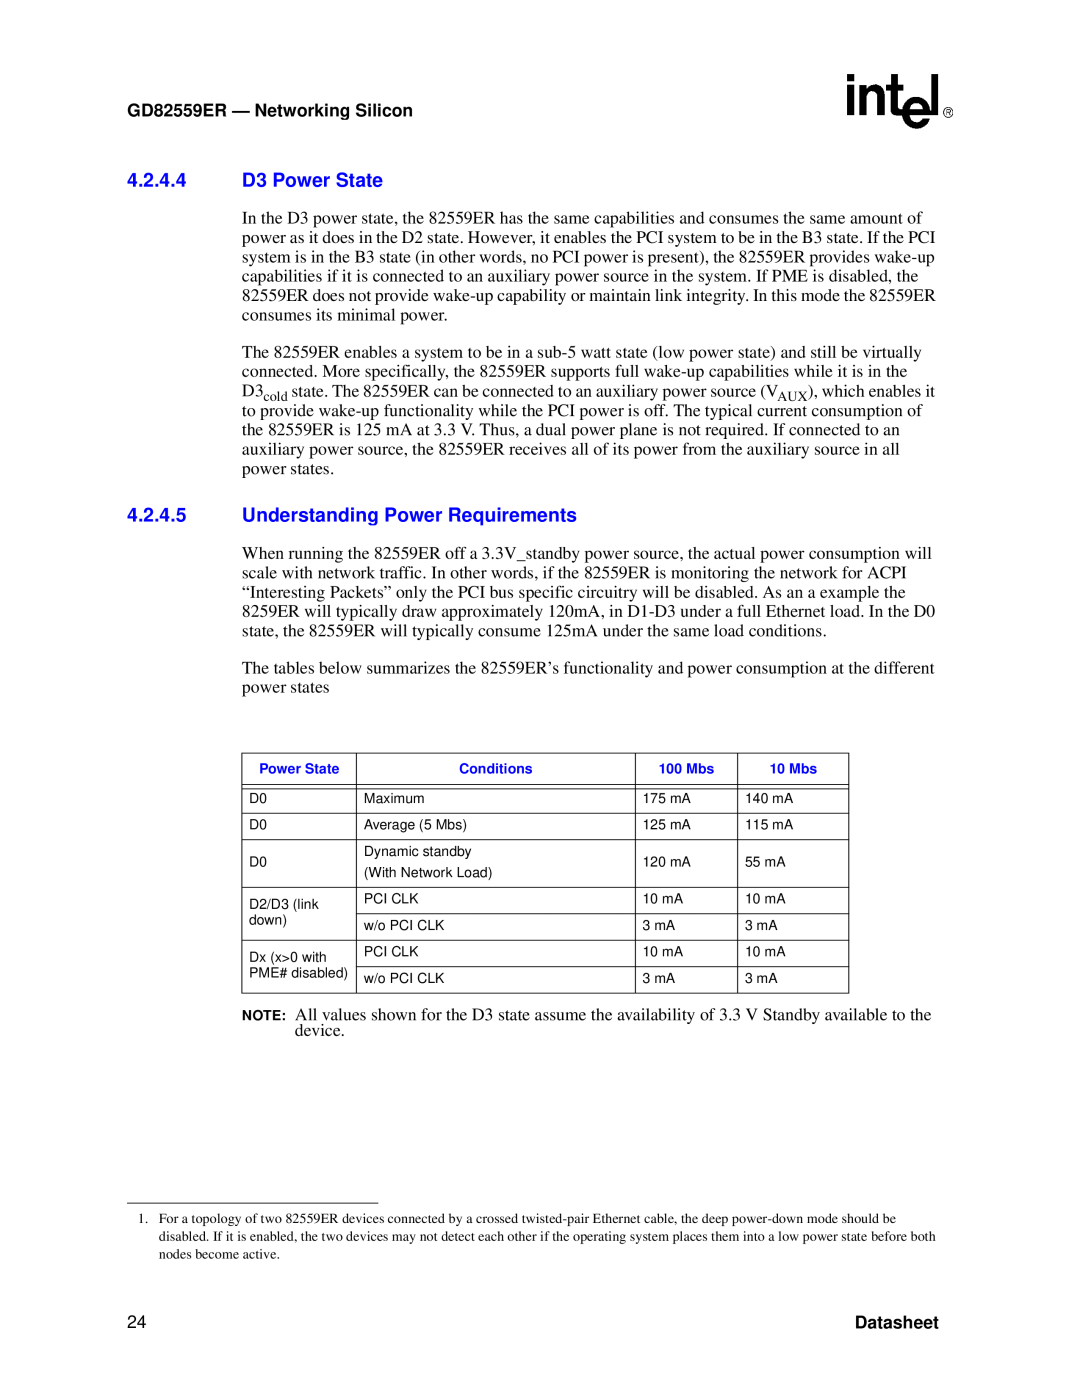 Intel 4.2.4.4 D3 Power State, Understanding Power Requirements, GD82559ER - Networkin g Silicon, Datasheet, Conditions 